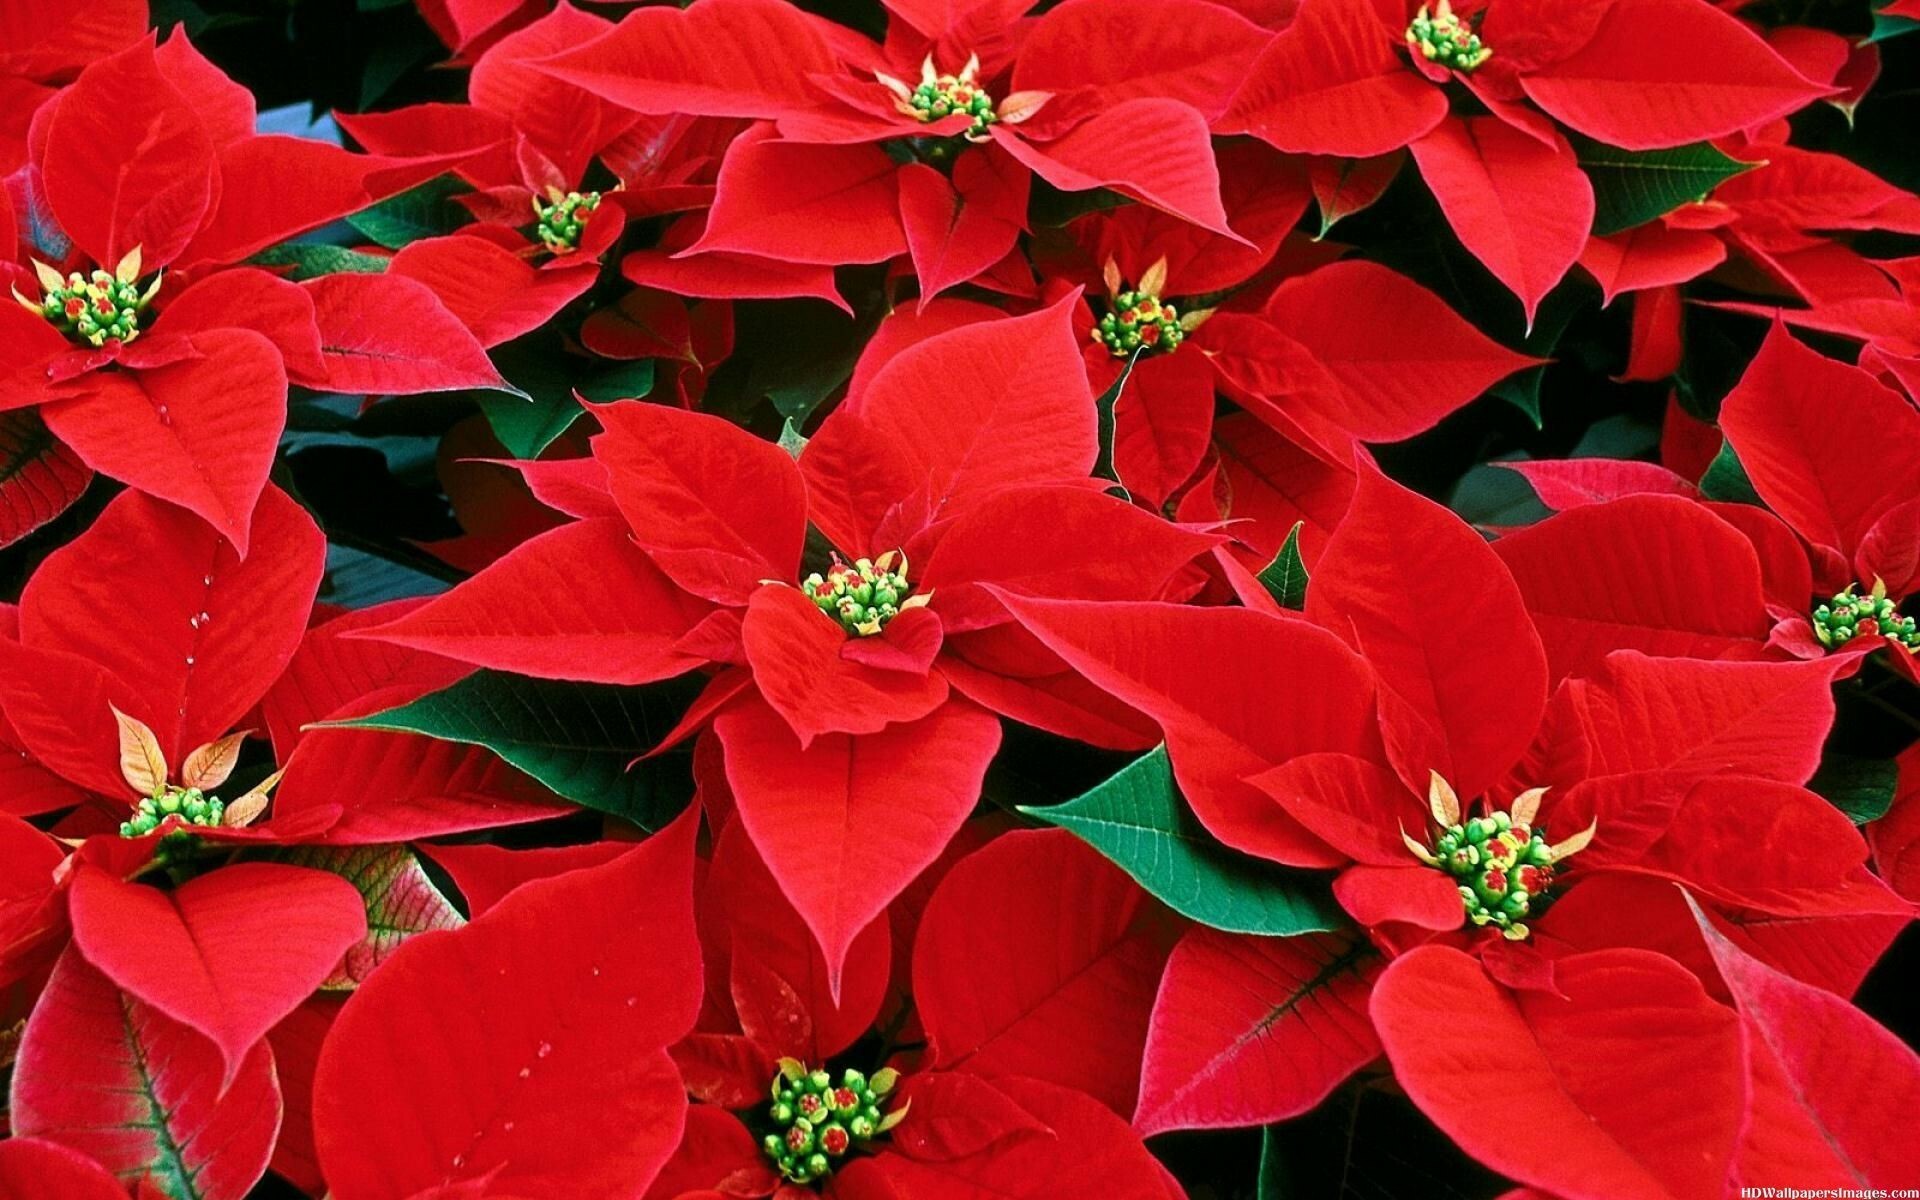 Poinsettia: The large colorful bracts are often mistaken for flower petals, but they are in fact leaves. 1920x1200 HD Wallpaper.